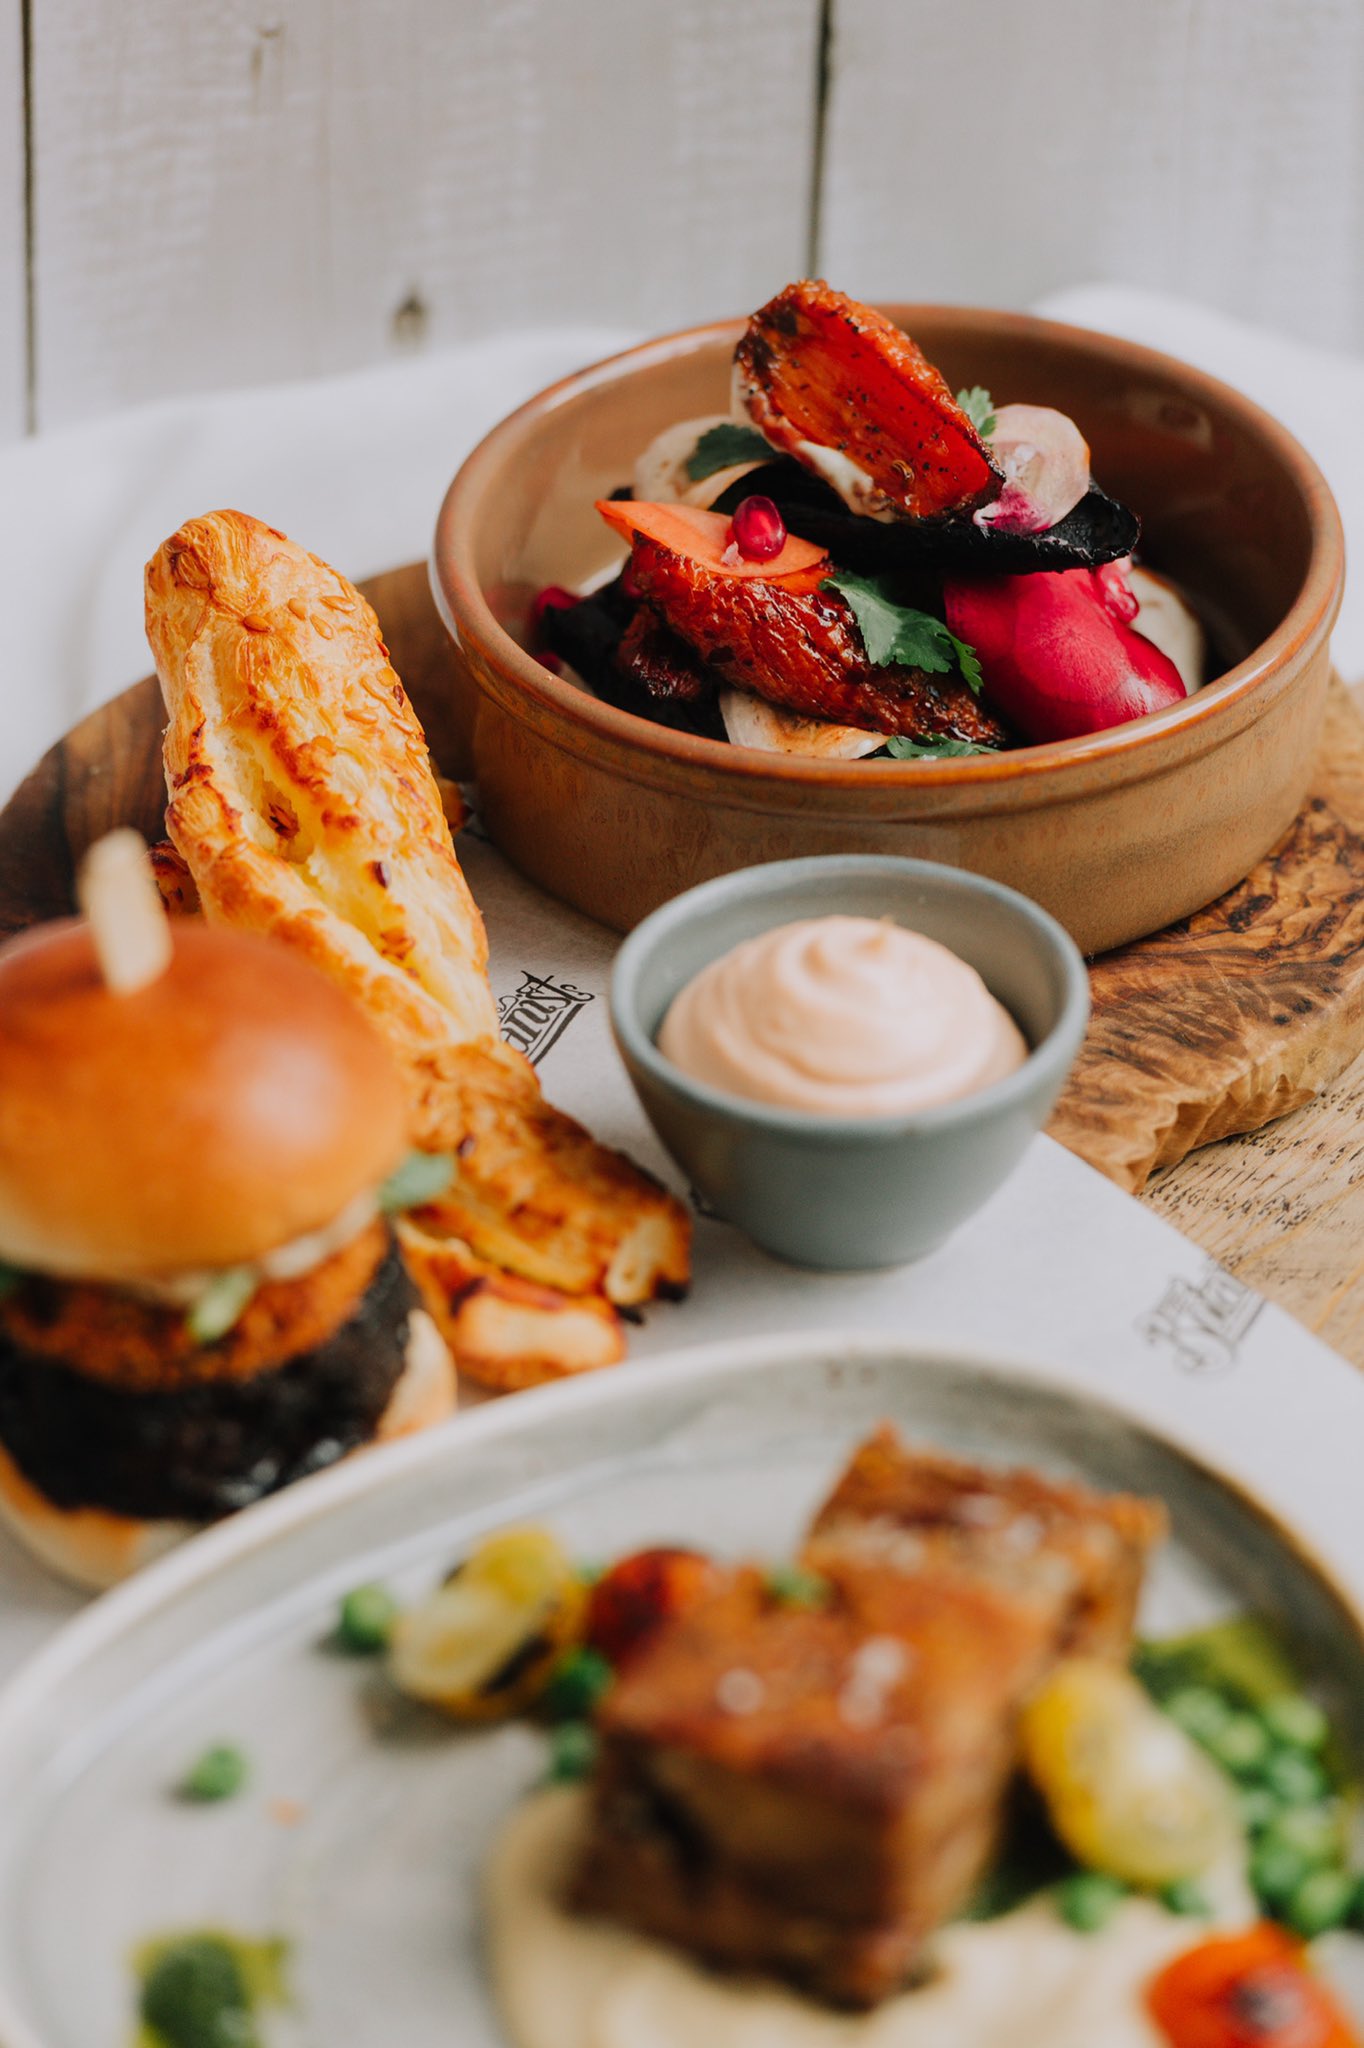 The Botanist The Botanist Leeds We Are Excited To Announce That We Will Be Trialing A New Menu Offering At Our Leeds Restaurant From The 19th Of May If You Re